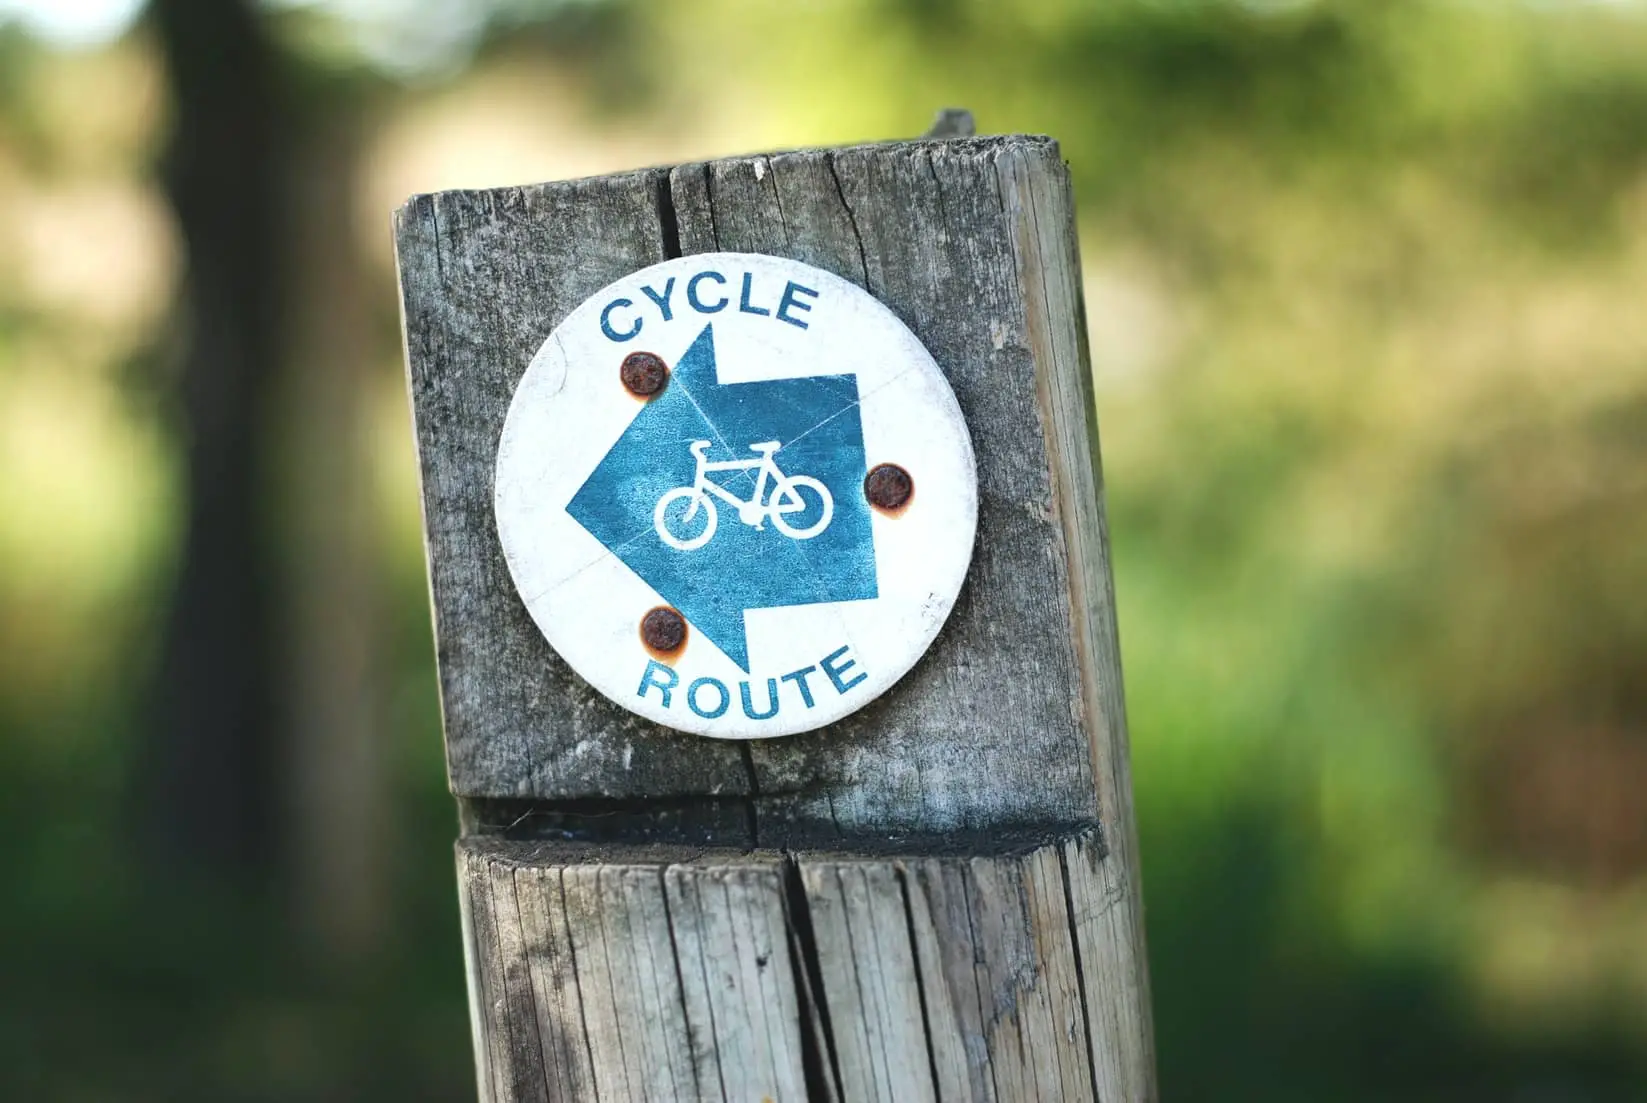 post with cycle path sign